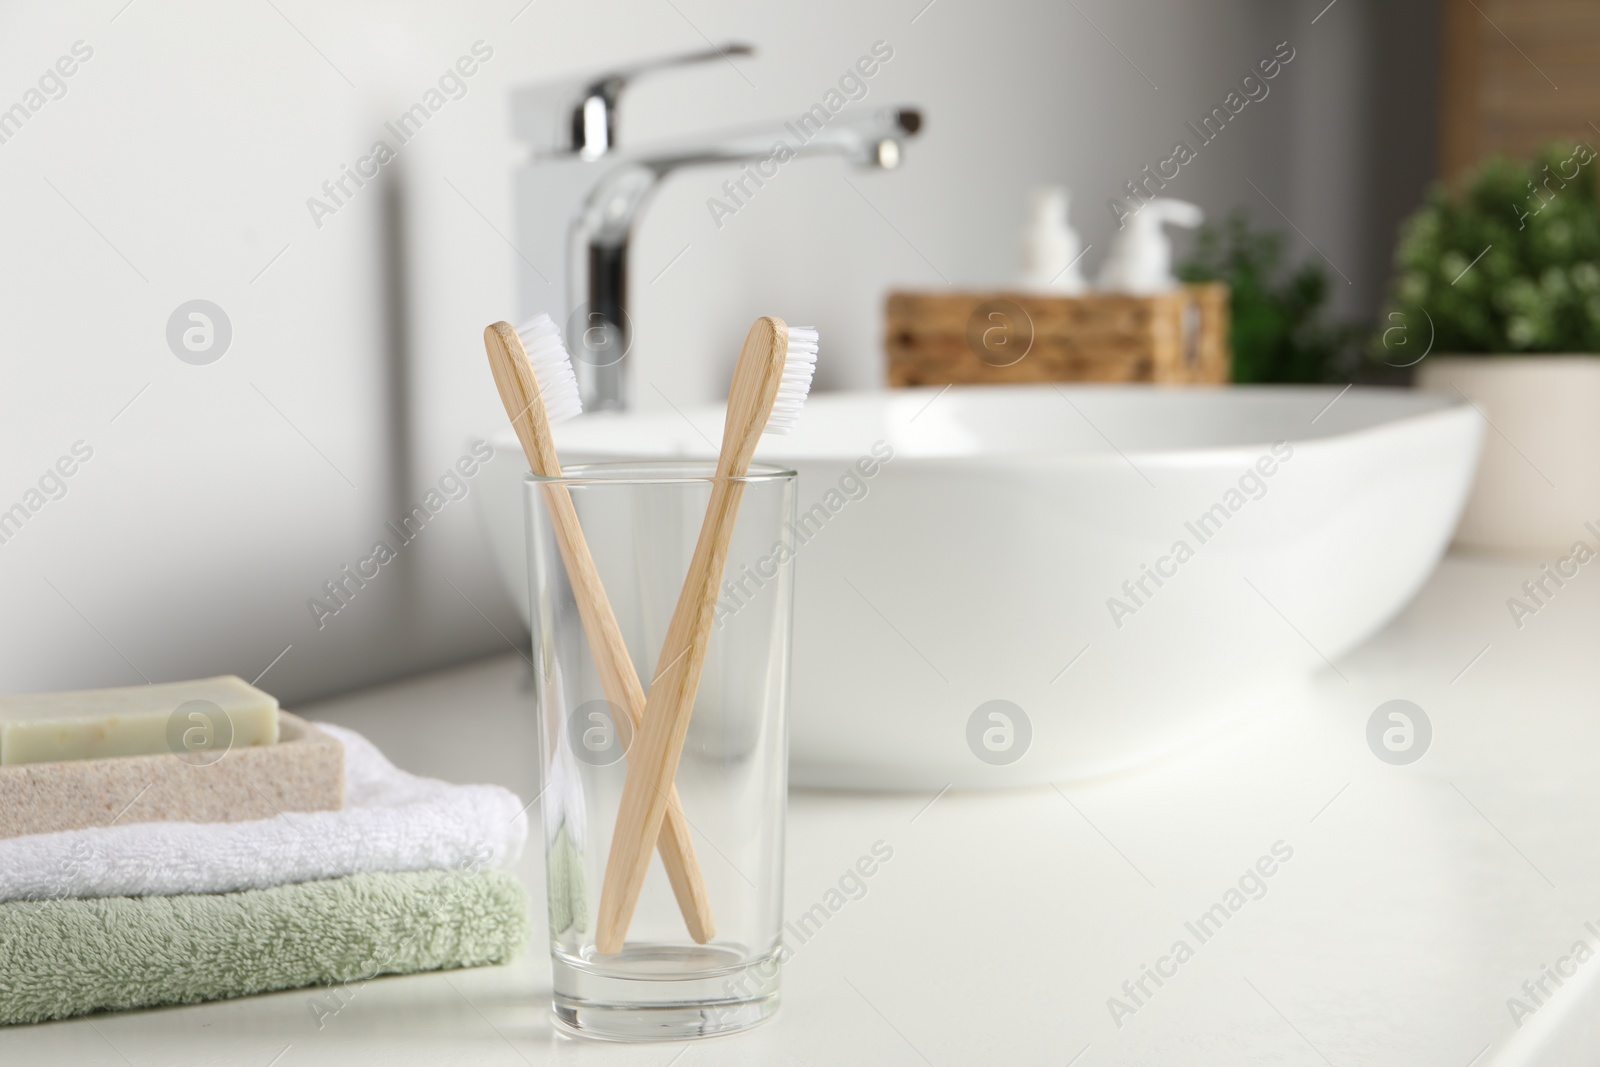 Photo of Bamboo toothbrushes and towels on white countertop in bathroom, space for text